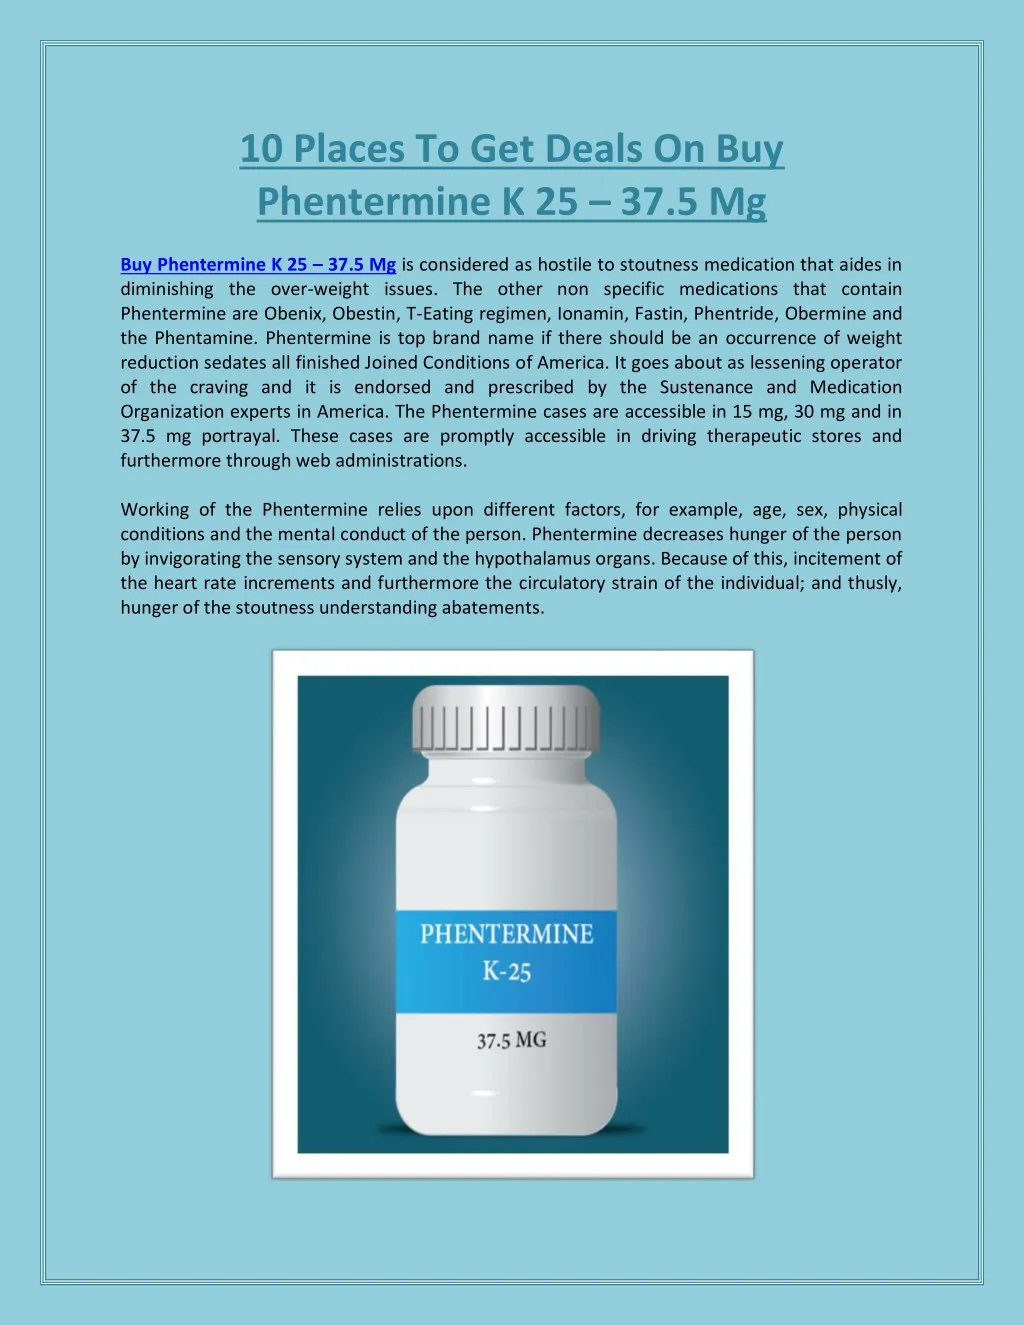 10 places to get deals on buy phentermine